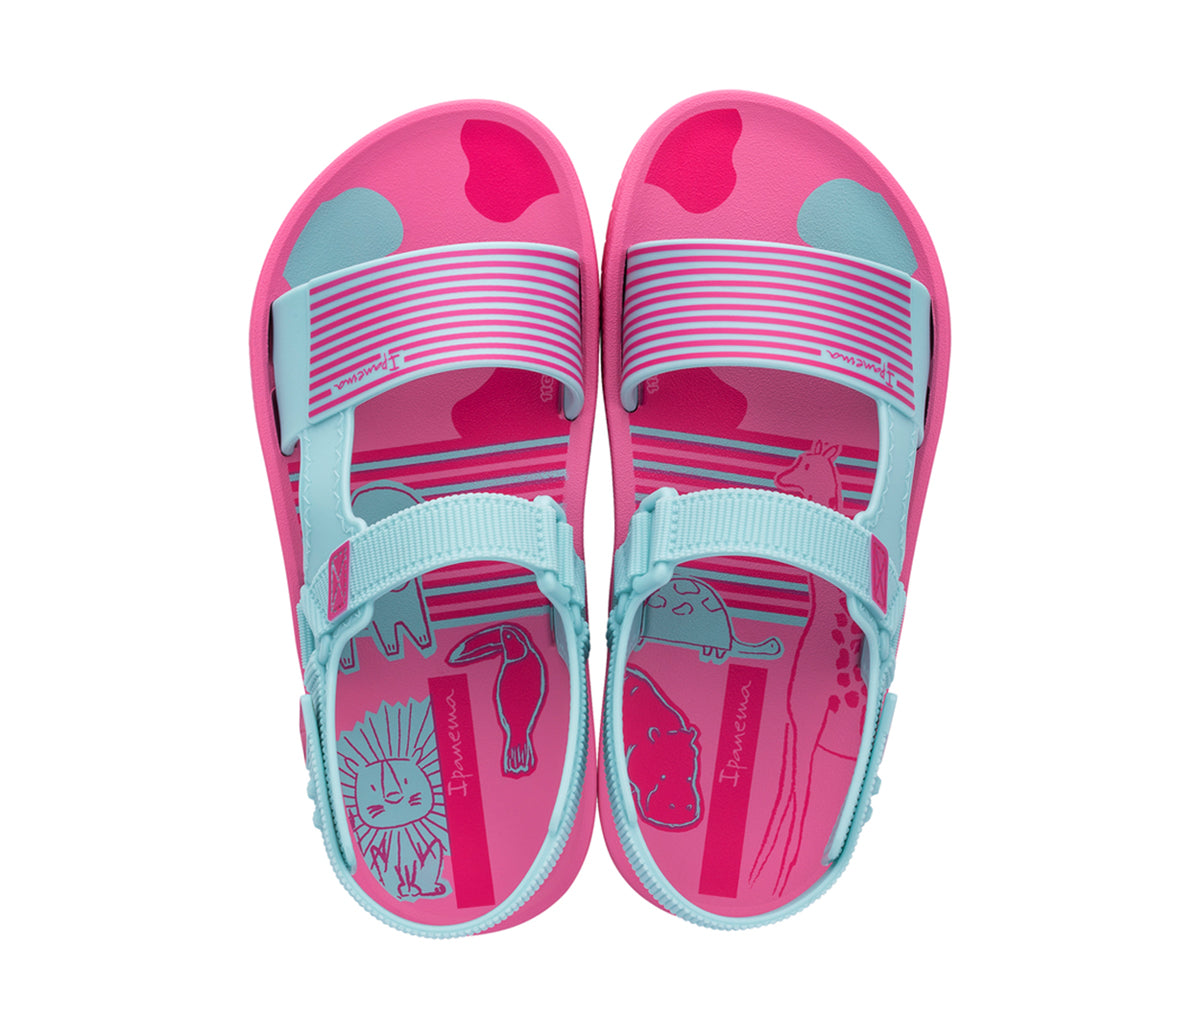 Top view of a pair of pink and green Ipanema Recreio Papate kids Sandals.